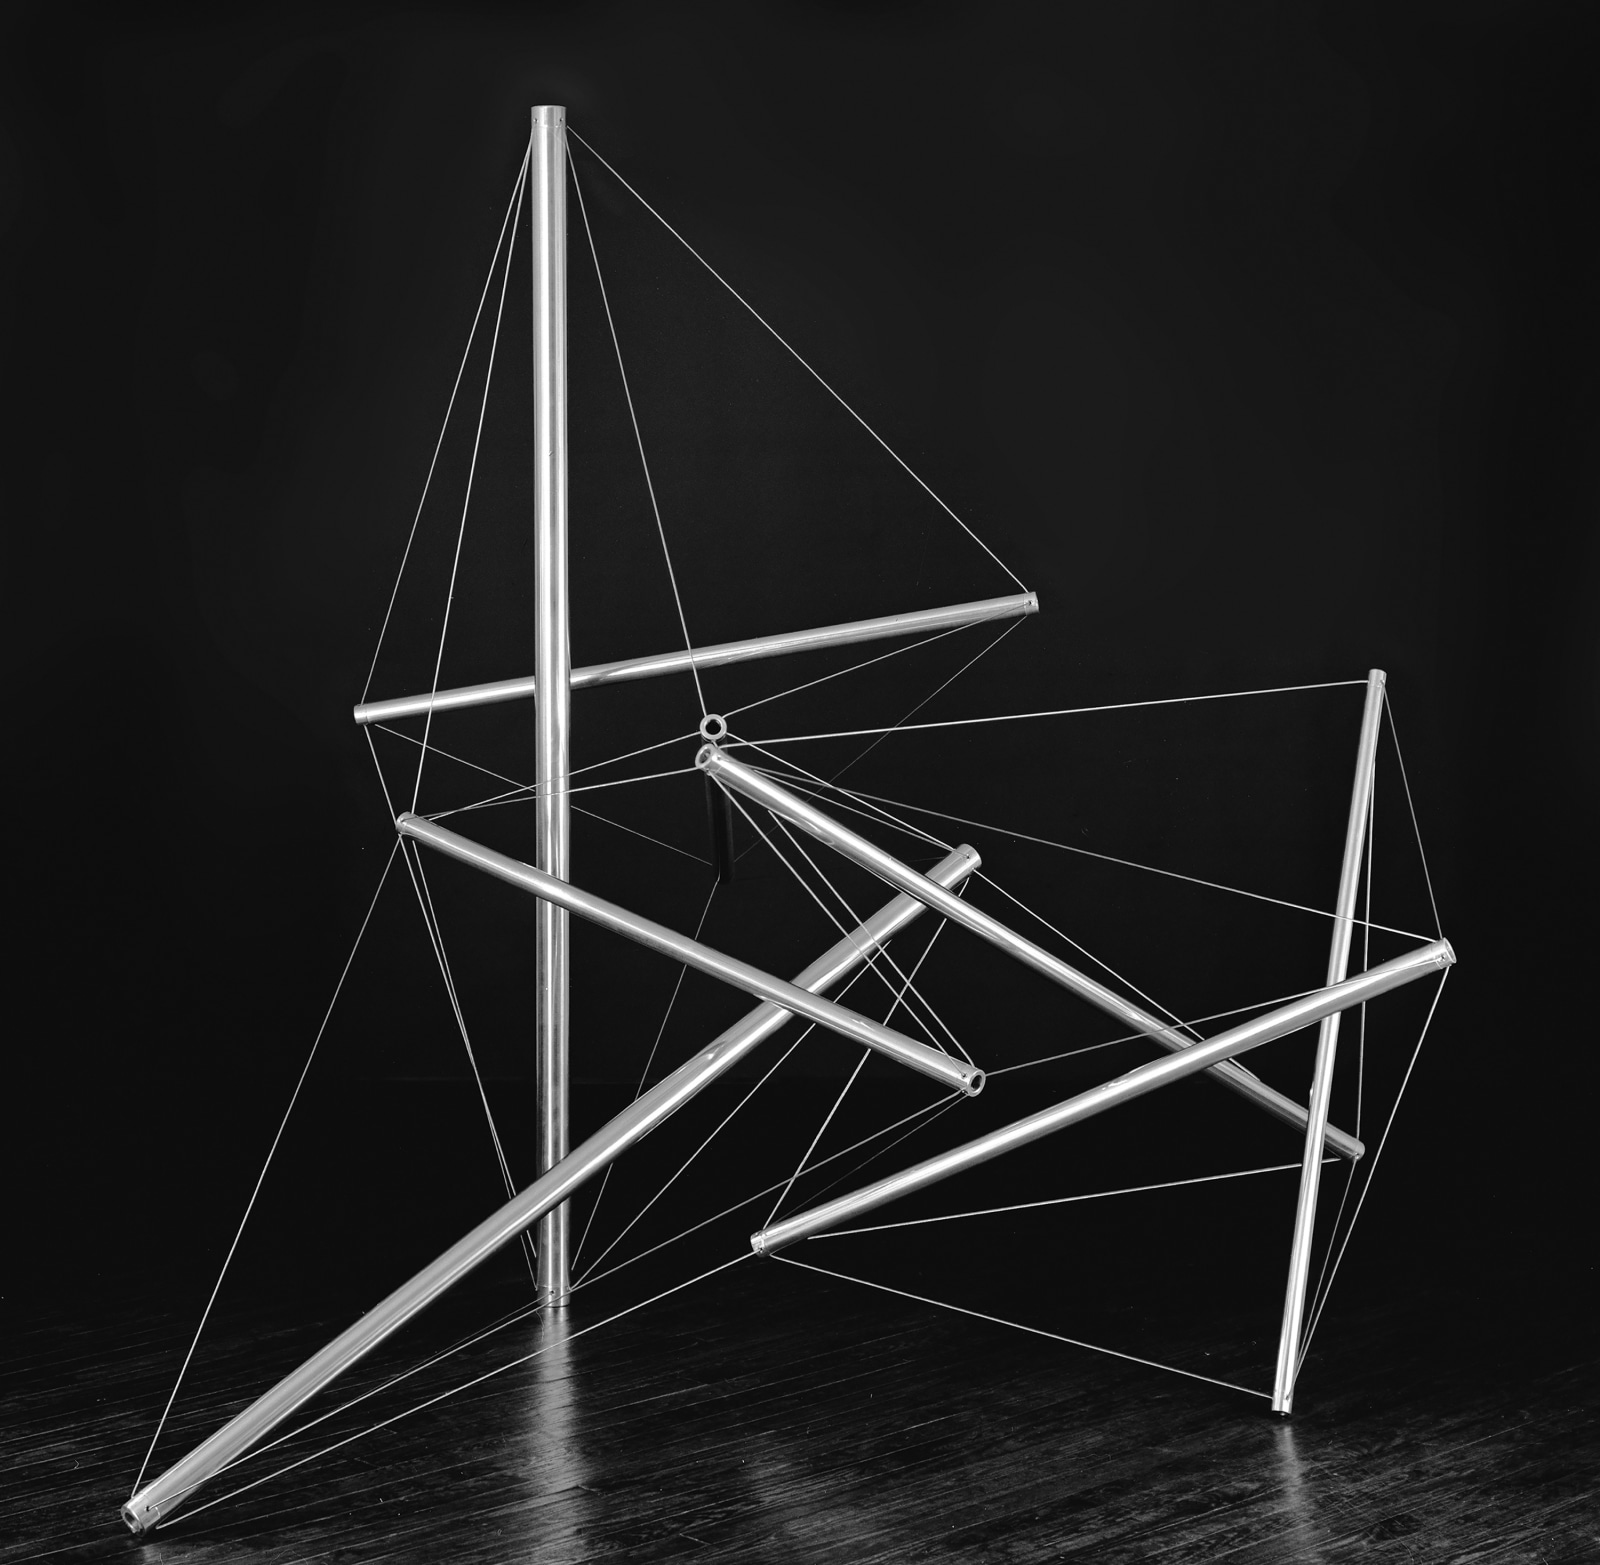 Kenneth Snelson exhibition on view at Raclin Murphy Museum of Art